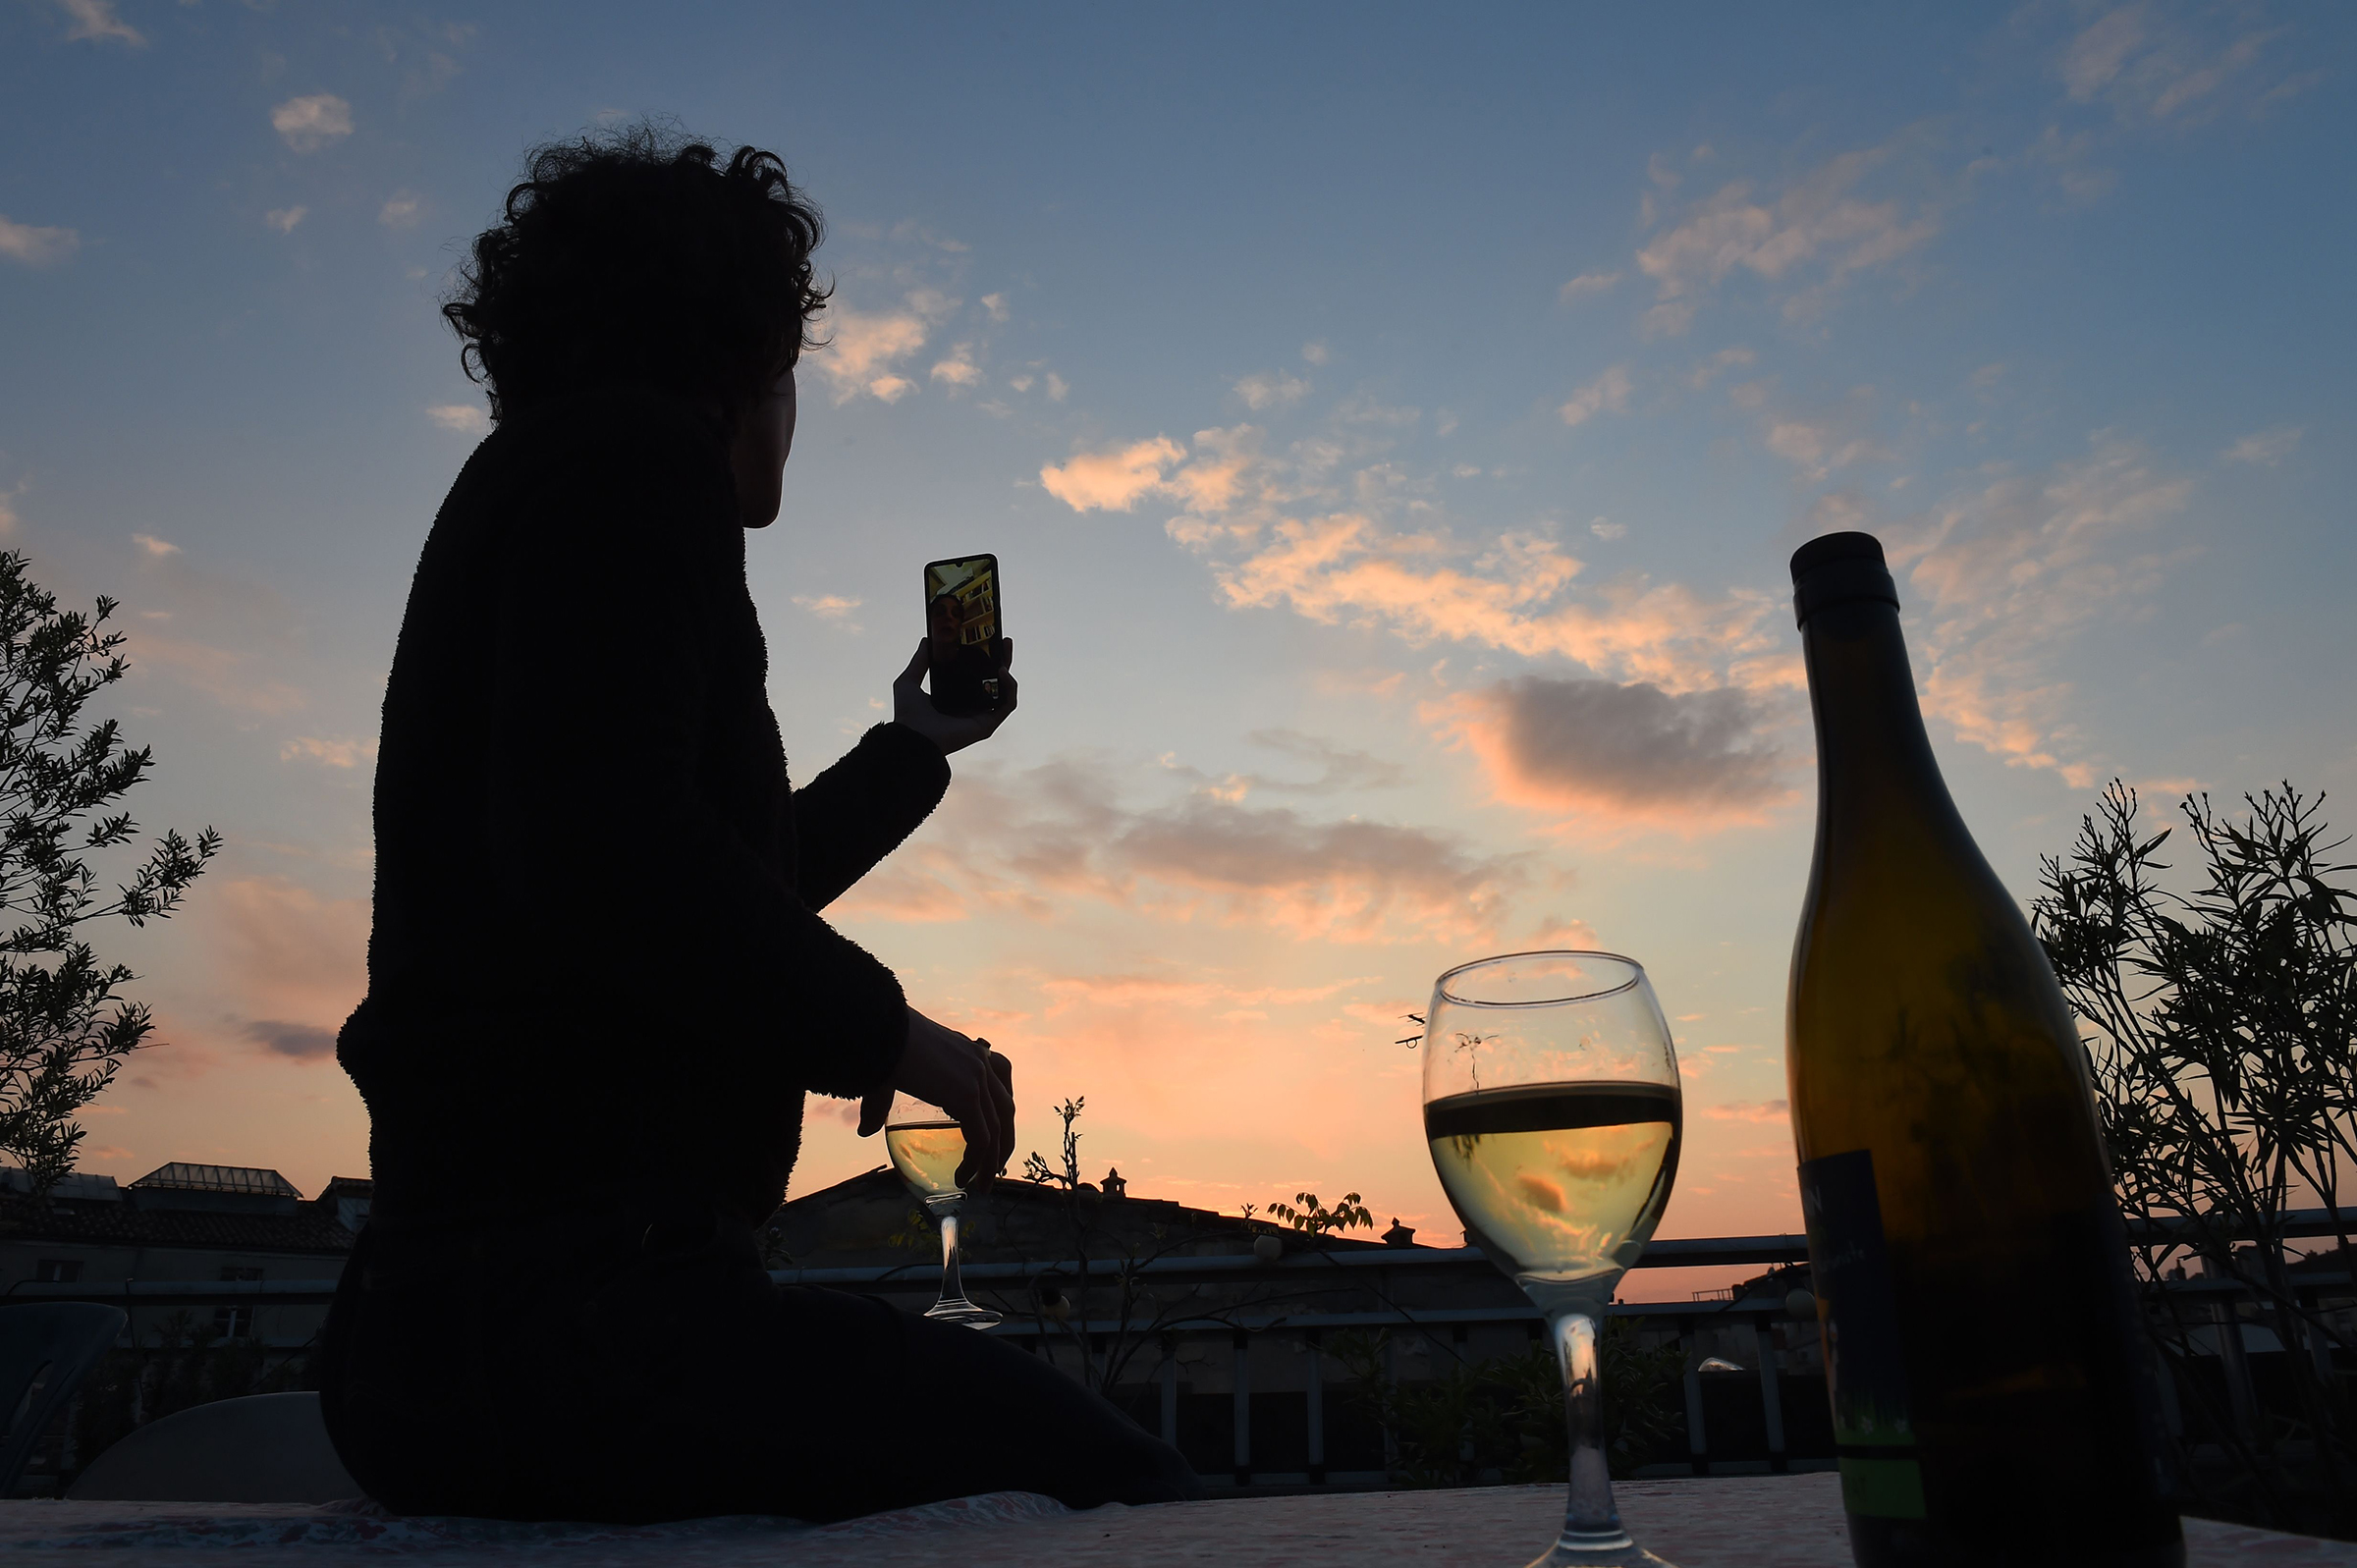 A woman drinks a glass of wine as she speaks and shares a drink with friends via a video call on March 26 in Bordeaux, southwestern France, in the evening on the tenth day of a lockdown aimed at curbing the spread of the COVID-19 in France (Nicolas Tucat—AFP/Getty IMages)